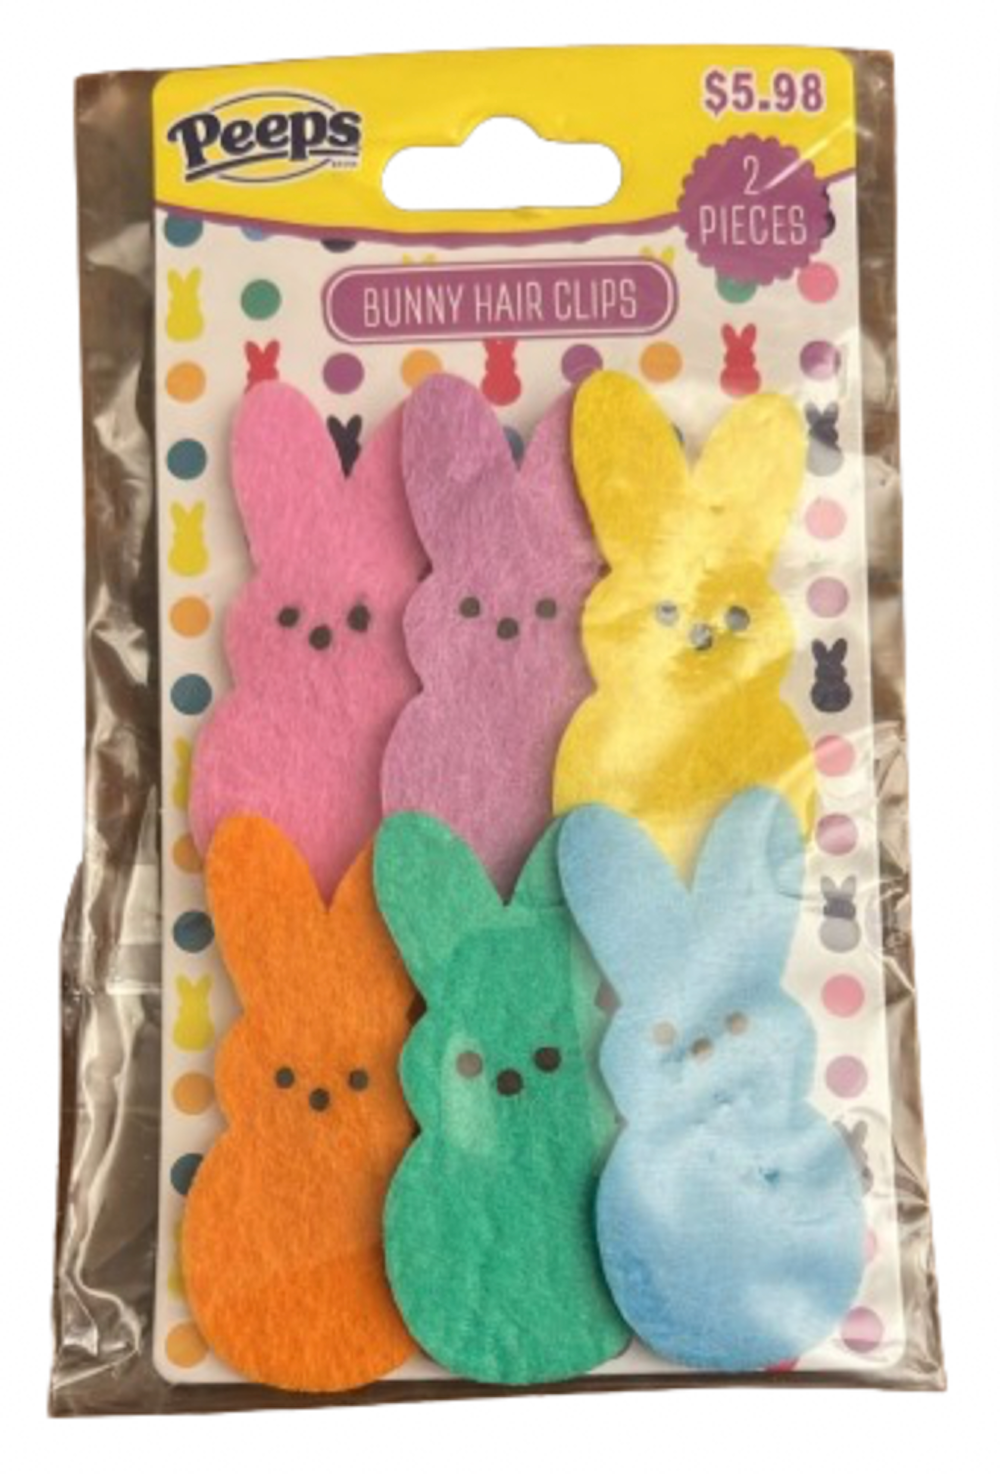 Peeps Easter 2 Multicolored Bunny Hair Clips New with Card